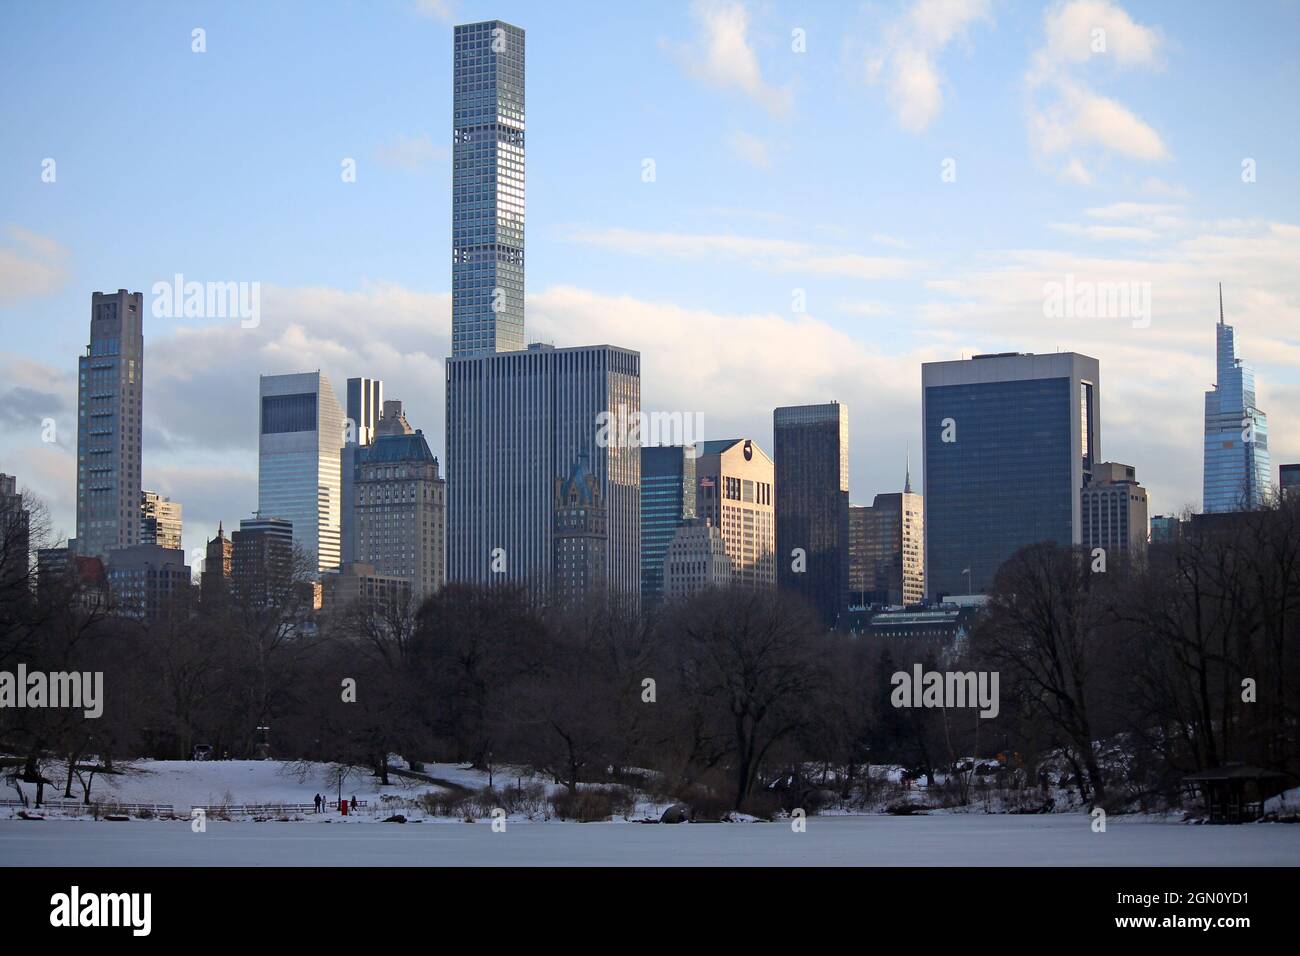 The billionaire row with skyscrapers below the frozen Central Park in New York City Stock Photo